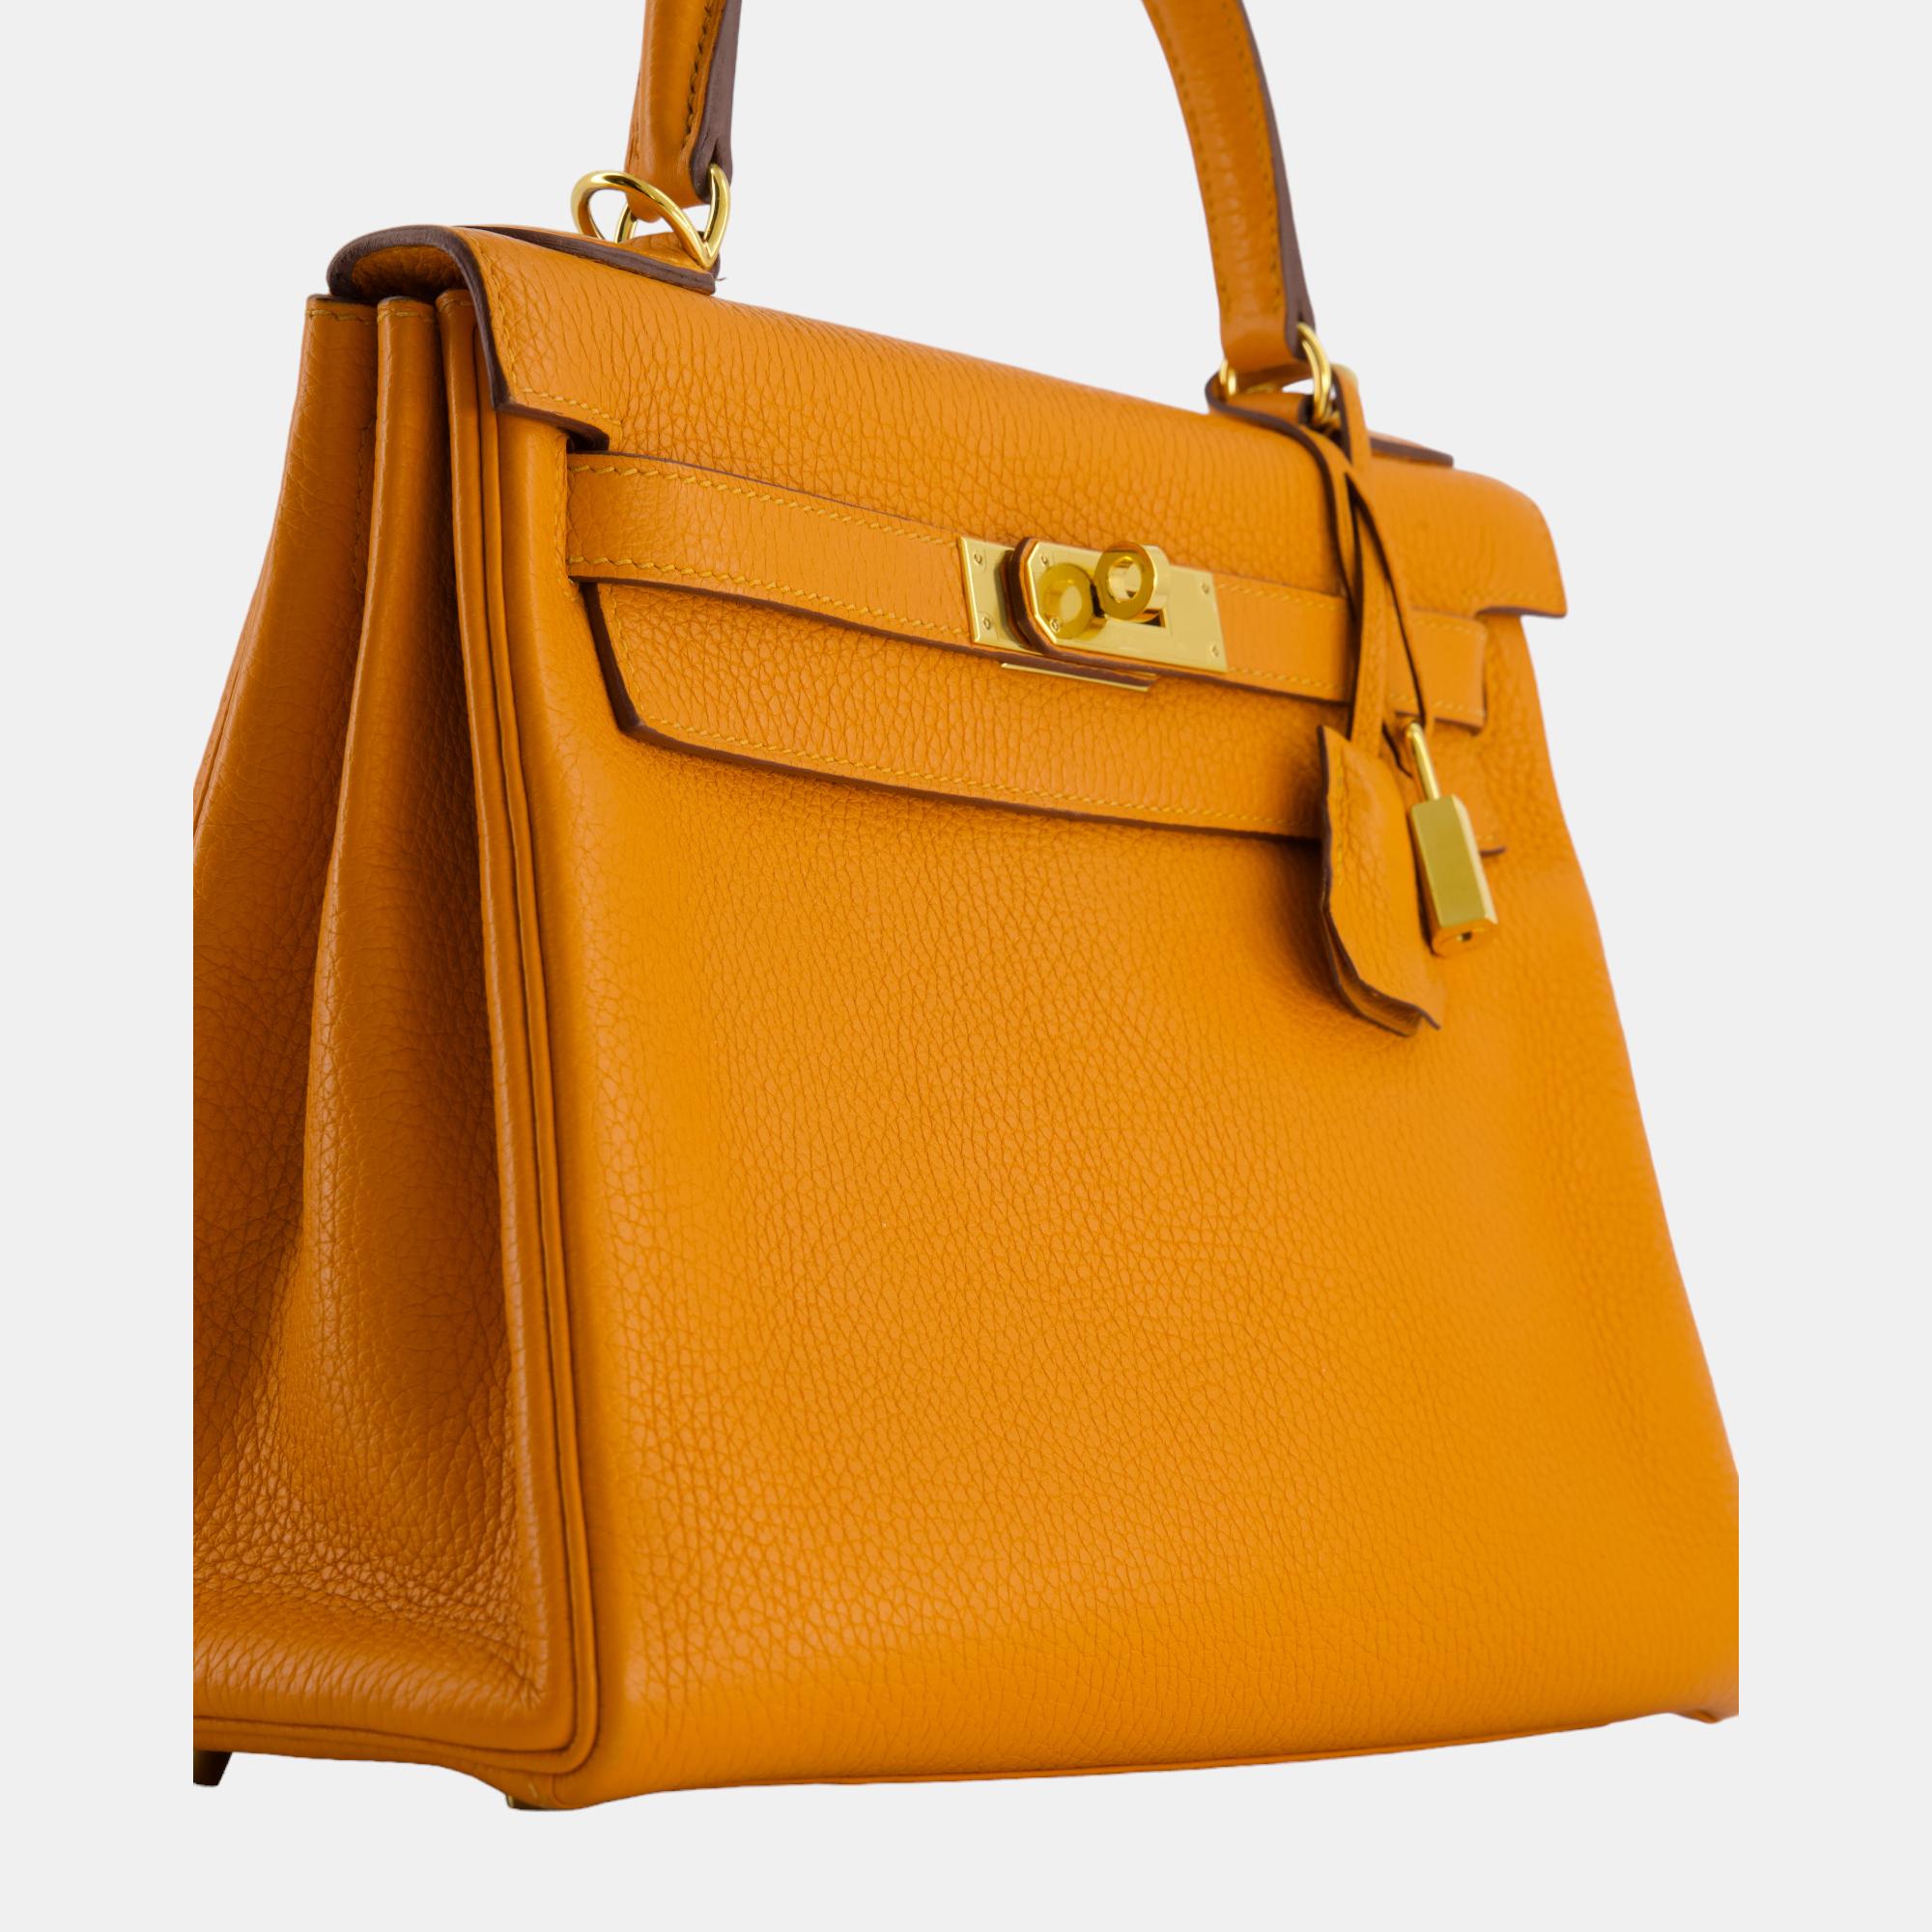 Hermes Kelly Bag 28cm In Abricot Clemence Leather With Gold Hardware